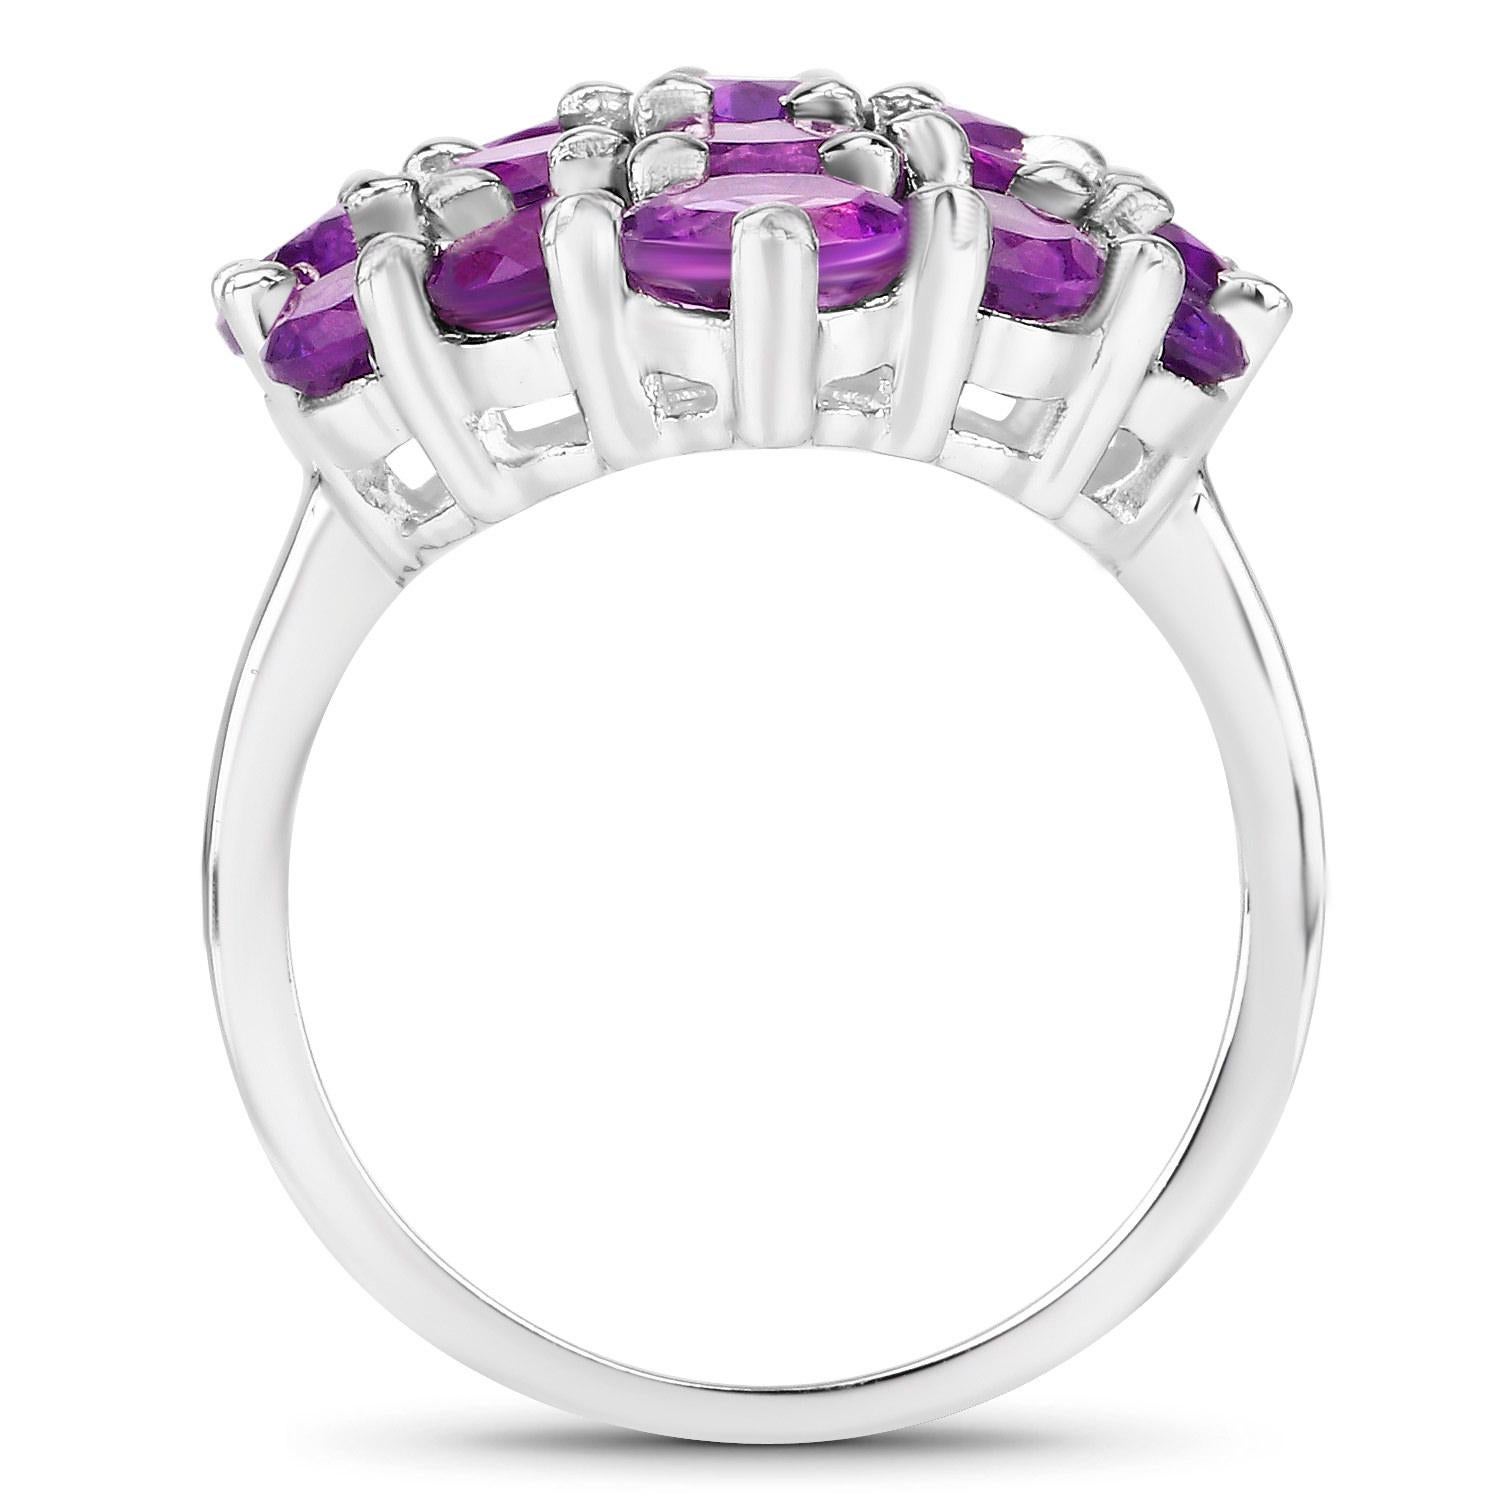 Stunning 5.50 Carats Natural Amethyst Cocktail Ring Sterling Silver In Excellent Condition For Sale In Laguna Niguel, CA